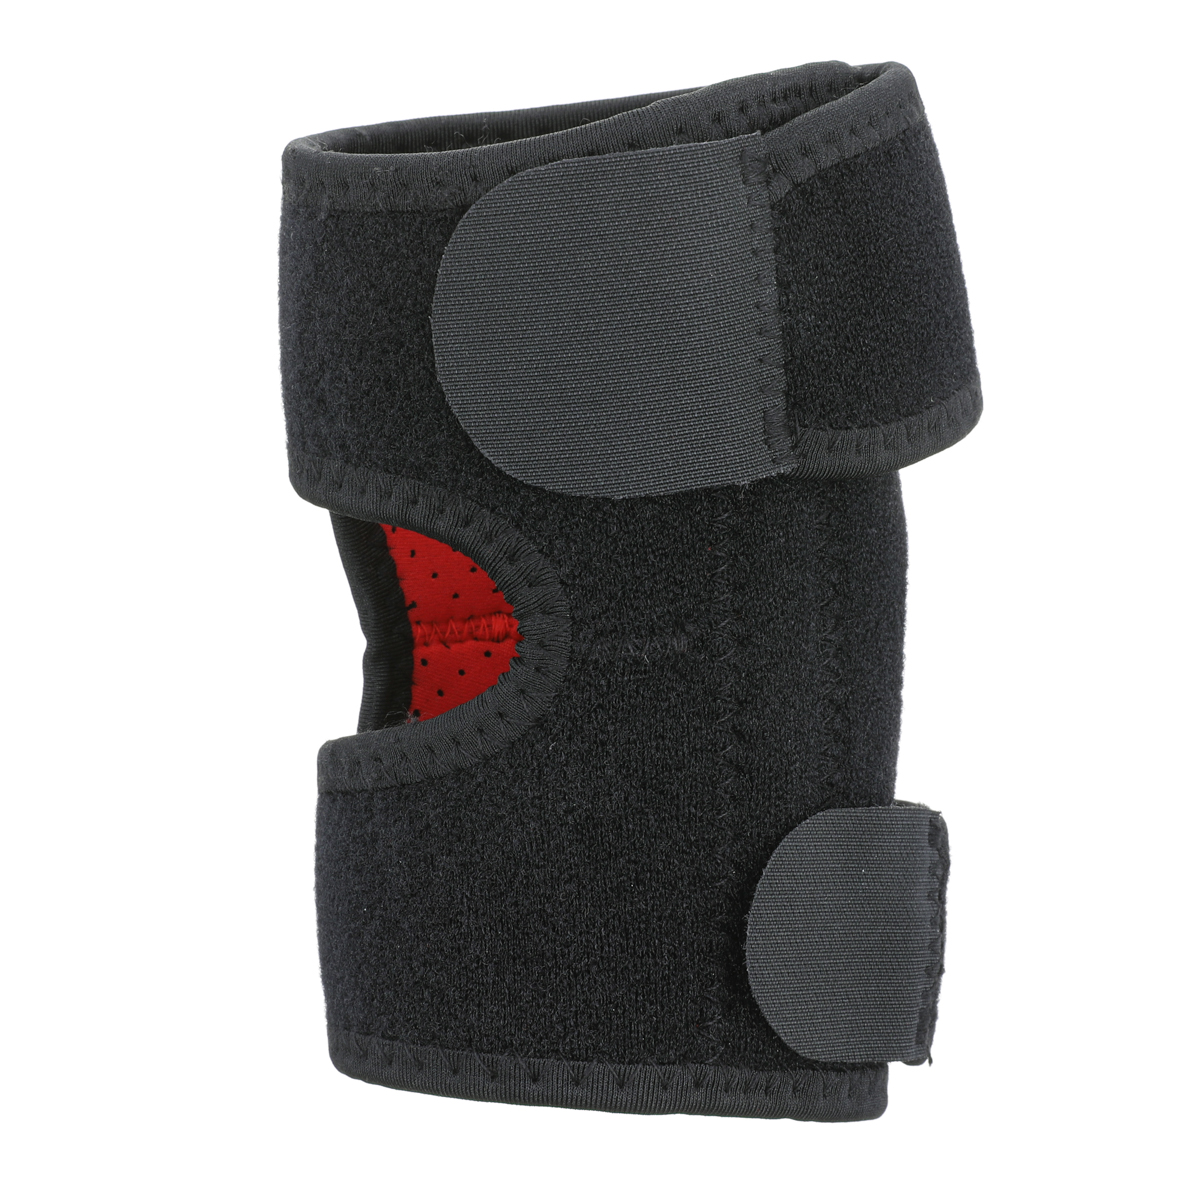 Adjustable-Elbow-Brace-Breathable-Neoprene-Support-with-Dual-Spring-Stabilisers-Arm-Wrap-Elbow-Strap-1648965-4